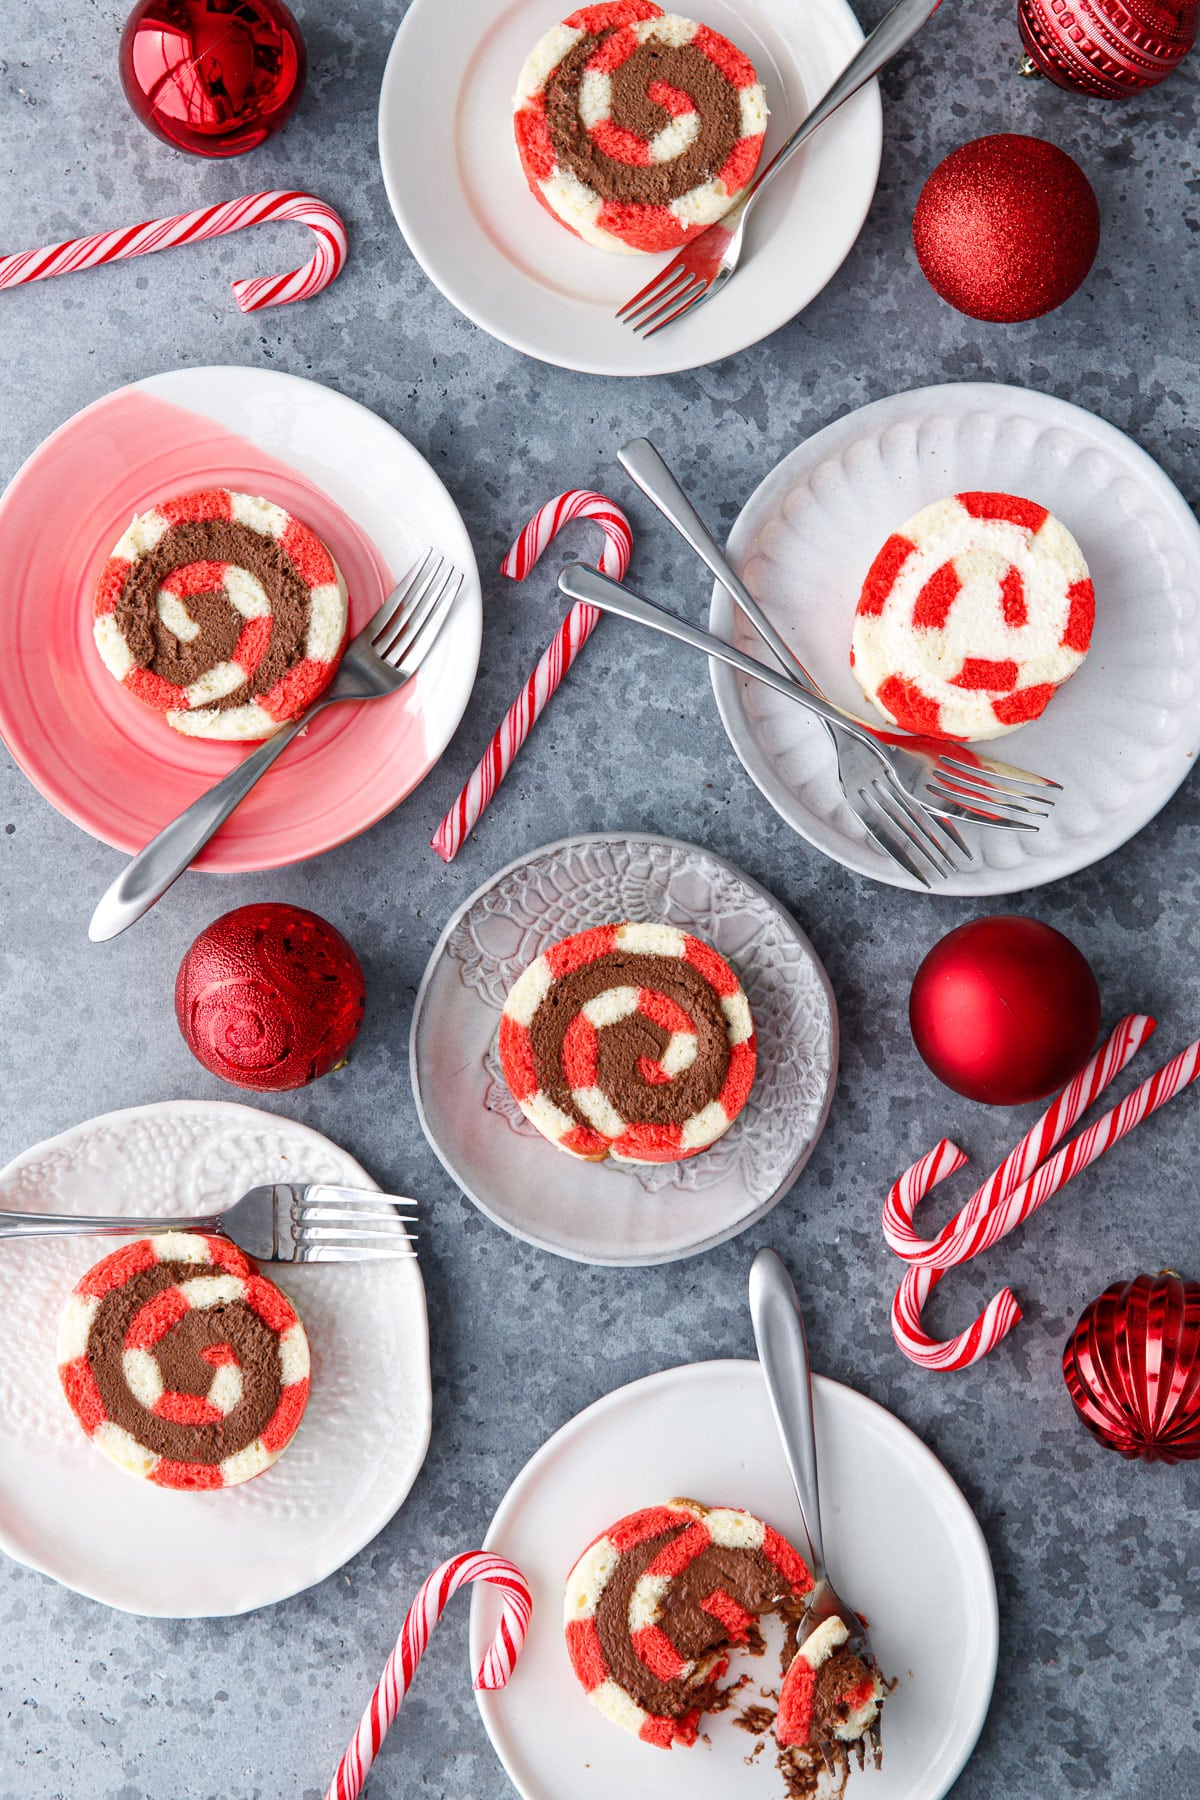 Birds-eye view of multiple plates with slices of Peppermint Swiss Cake Rolls with swirls of chocolate and white chocolate whipped cream filling, with some candy canes and red ornaments scattered around.